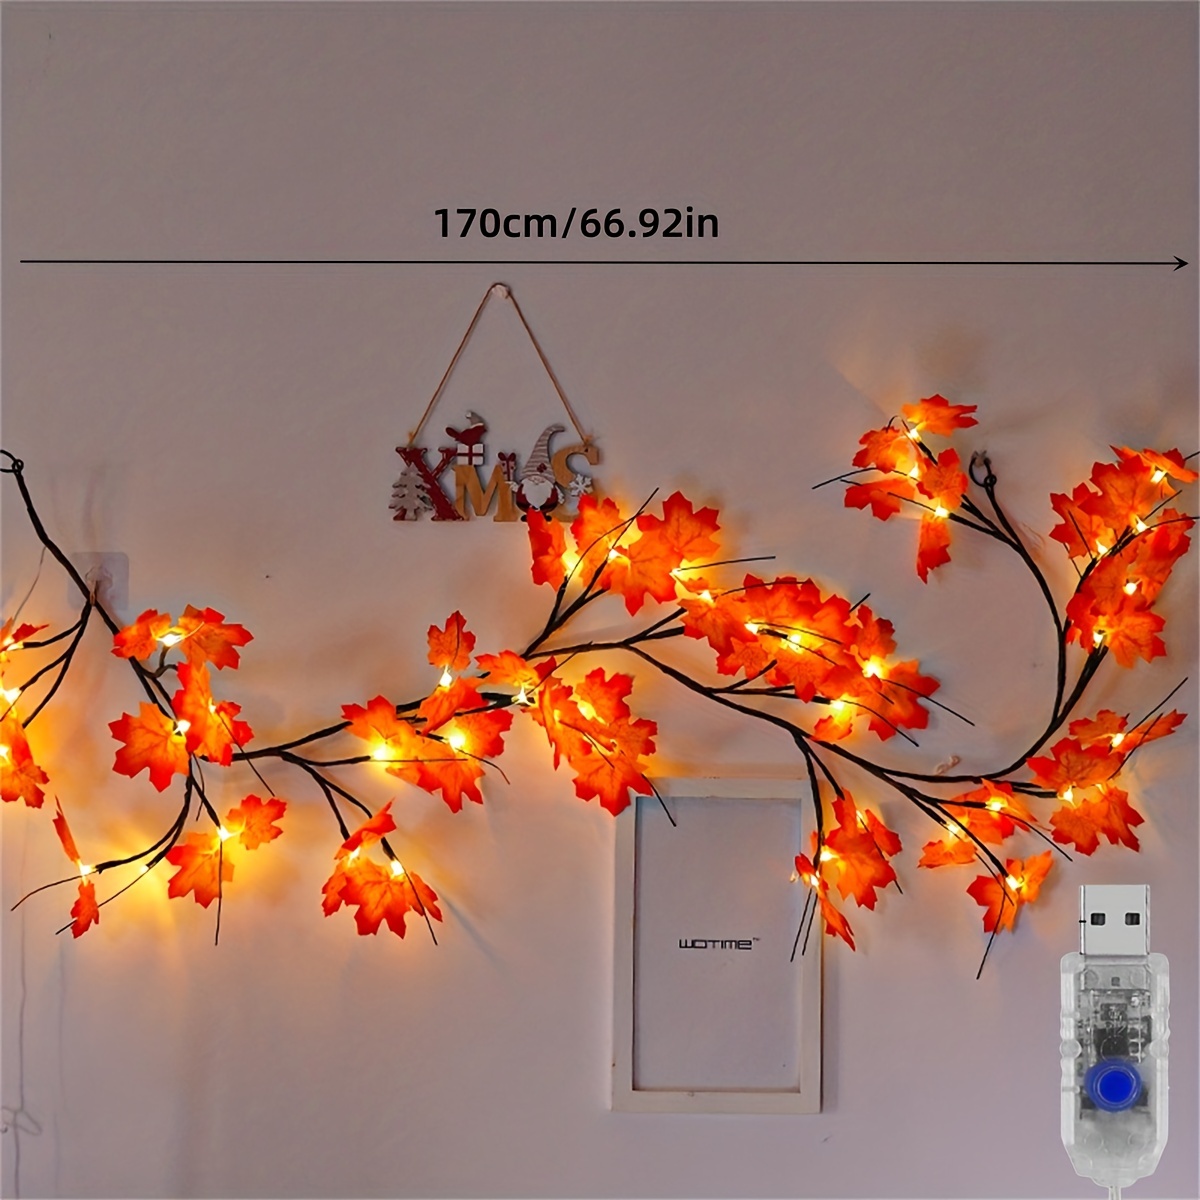 1pc enchanted willow vine lights for home decor christmas decorations flexible diy indoor artificial plants tree branches 48 leds 1 7m 5 58ft maple leaf willow vine lights for walls bedroom living room decor halloween thanksgiving details 1